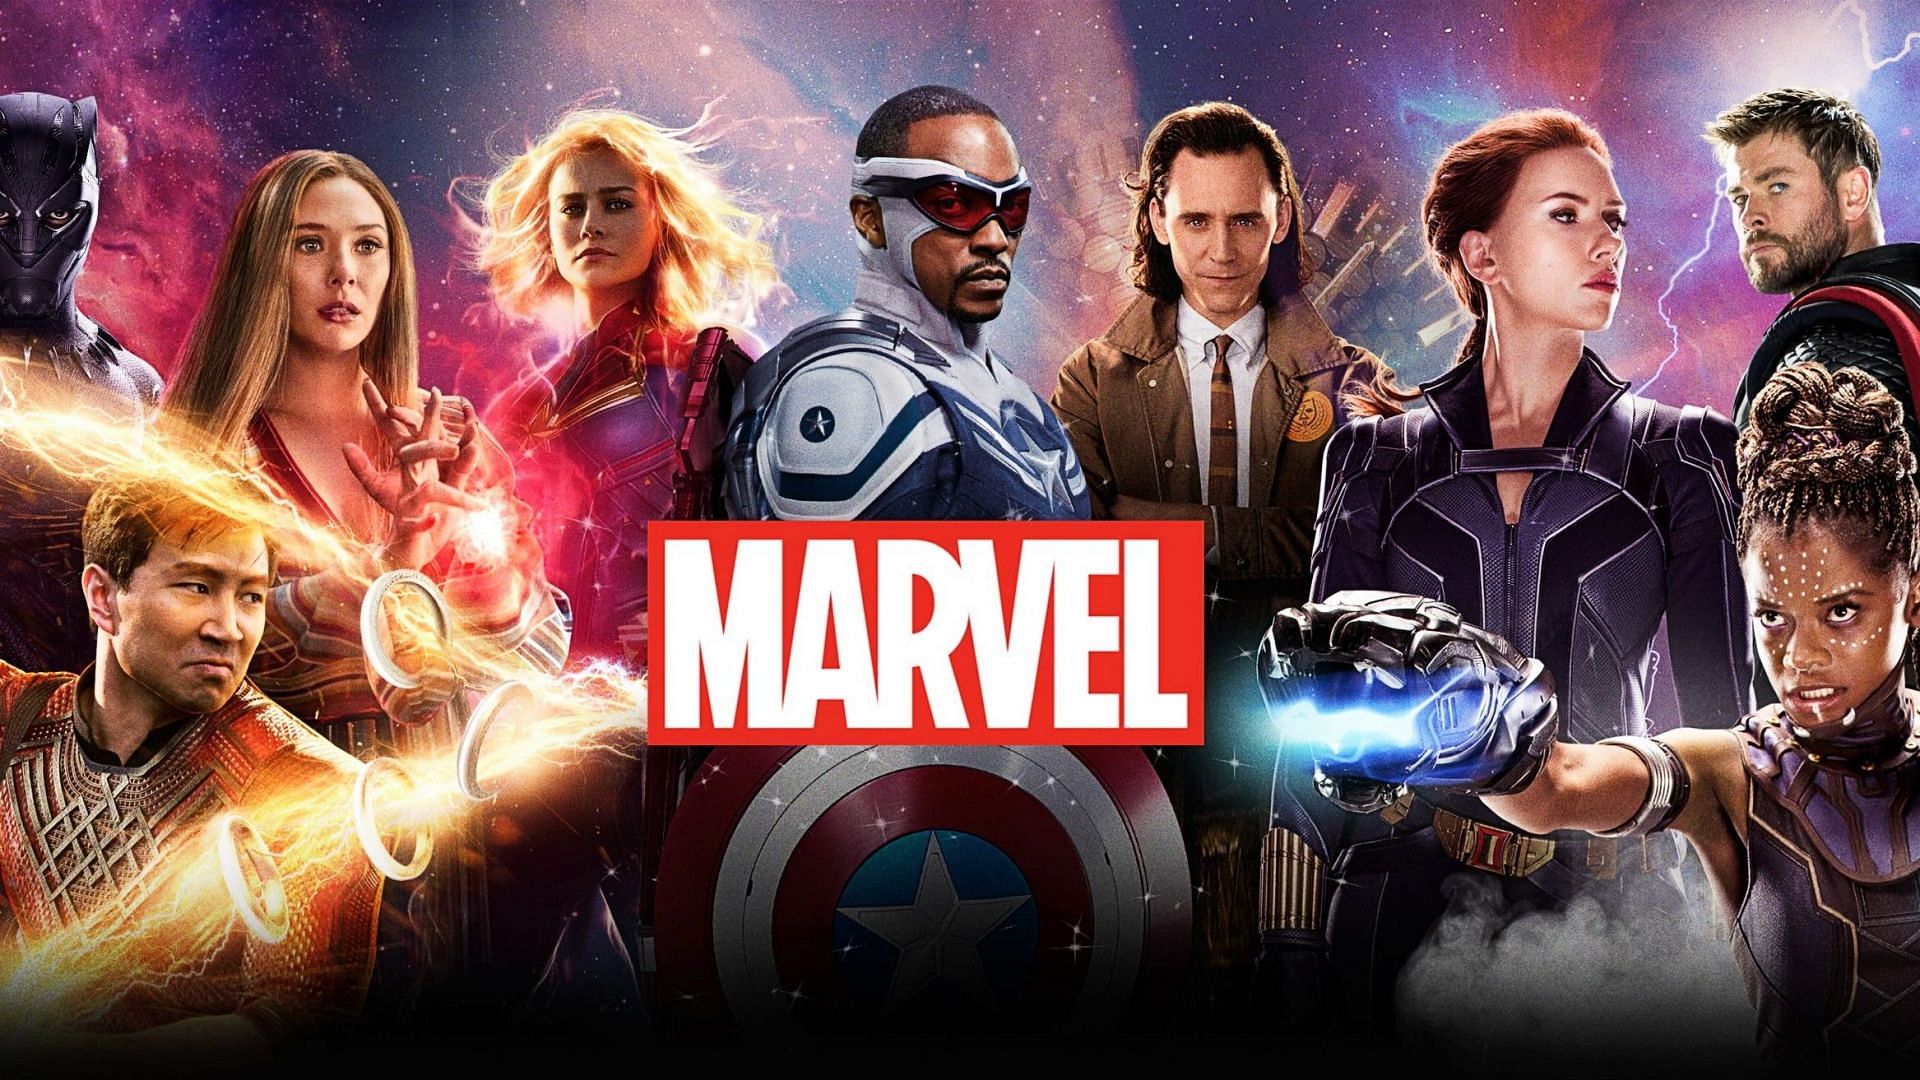 Confusion ensues as Disney&#039;s streaming platform stumbles with Marvel Cinematic Universe&#039;s timeline order once again (Image vis Disney)